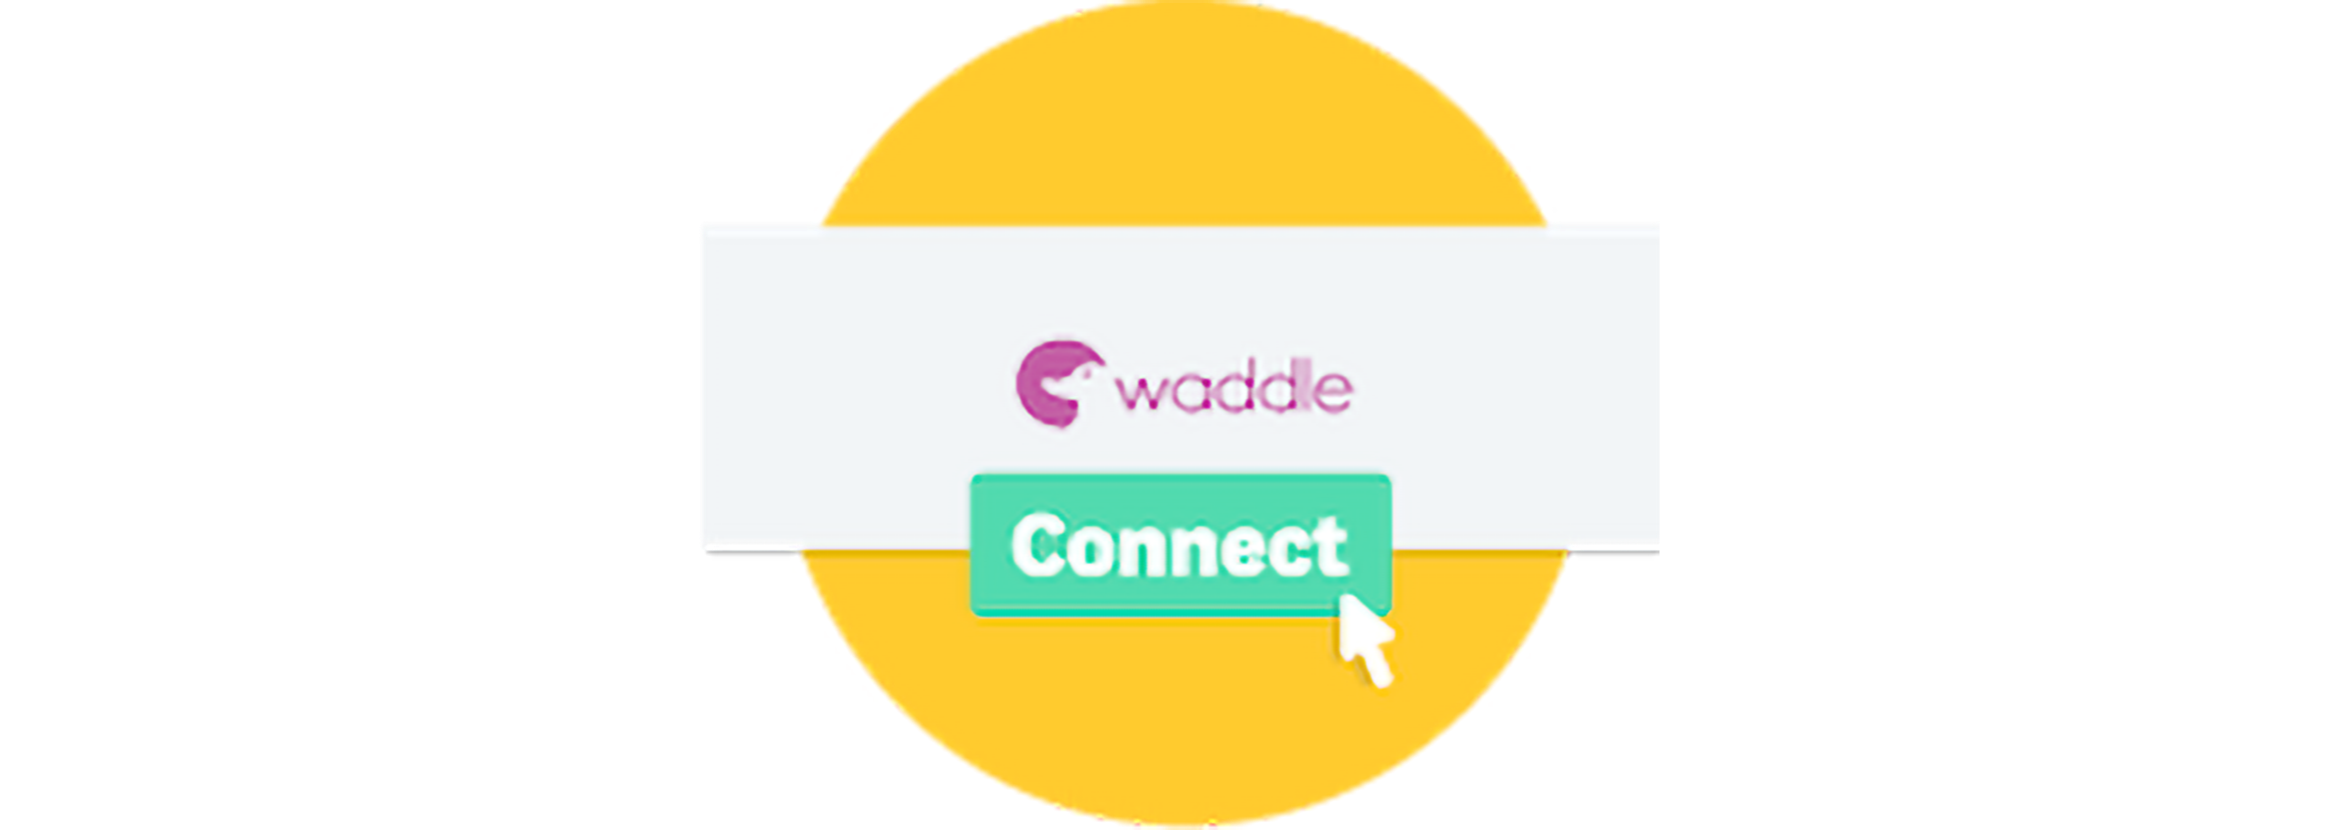 A yellow circle with the Waddle logo and a connect button in front of it.